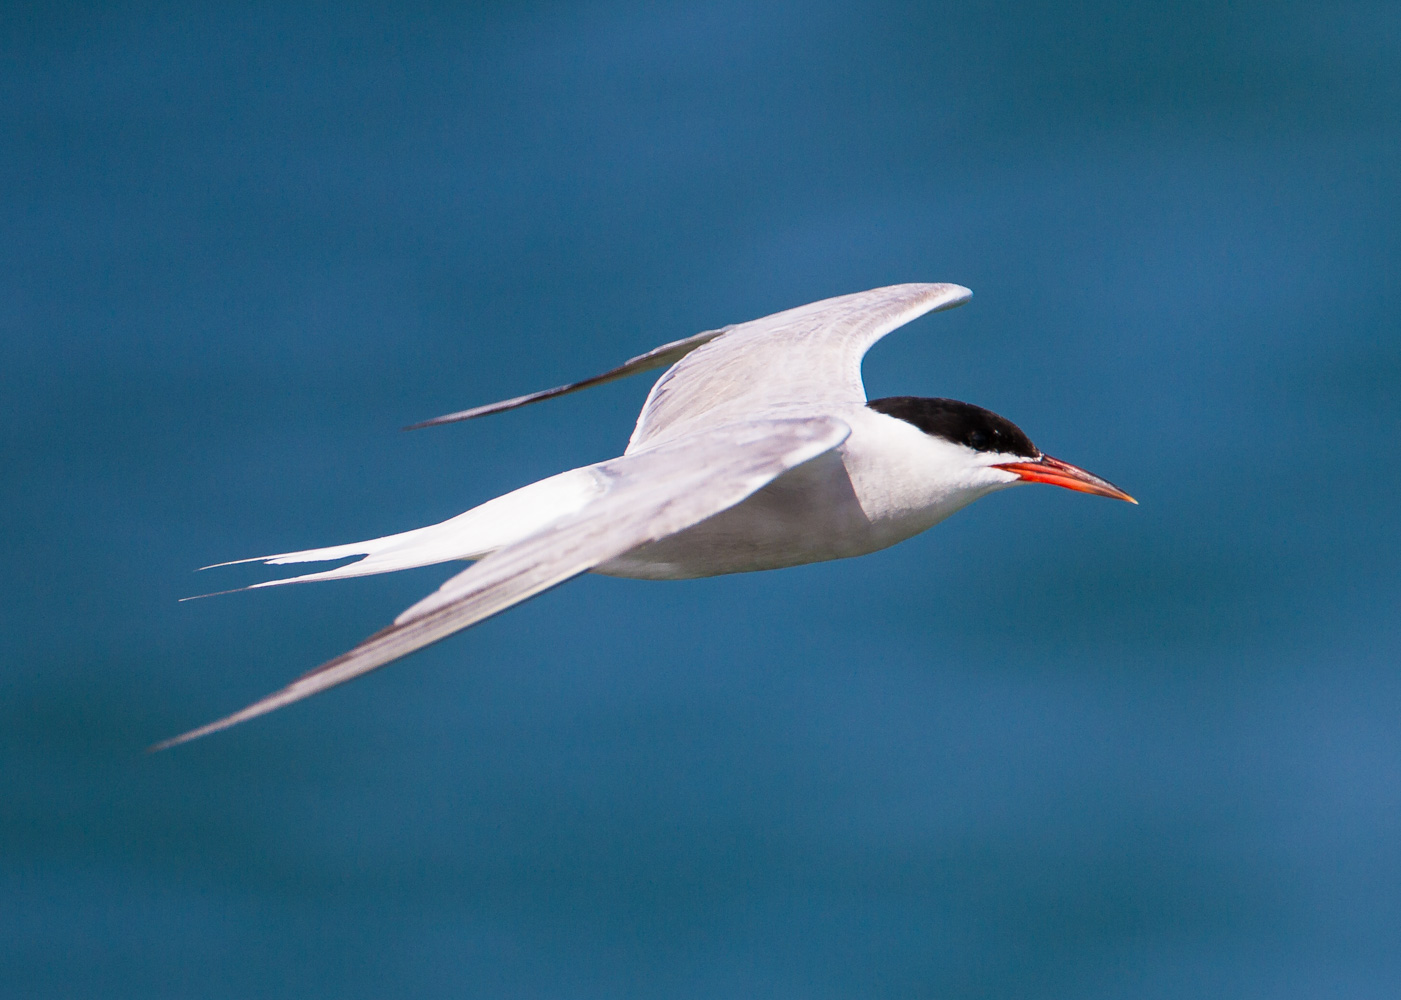 The designations will benefit common terns (Natural England/PA)